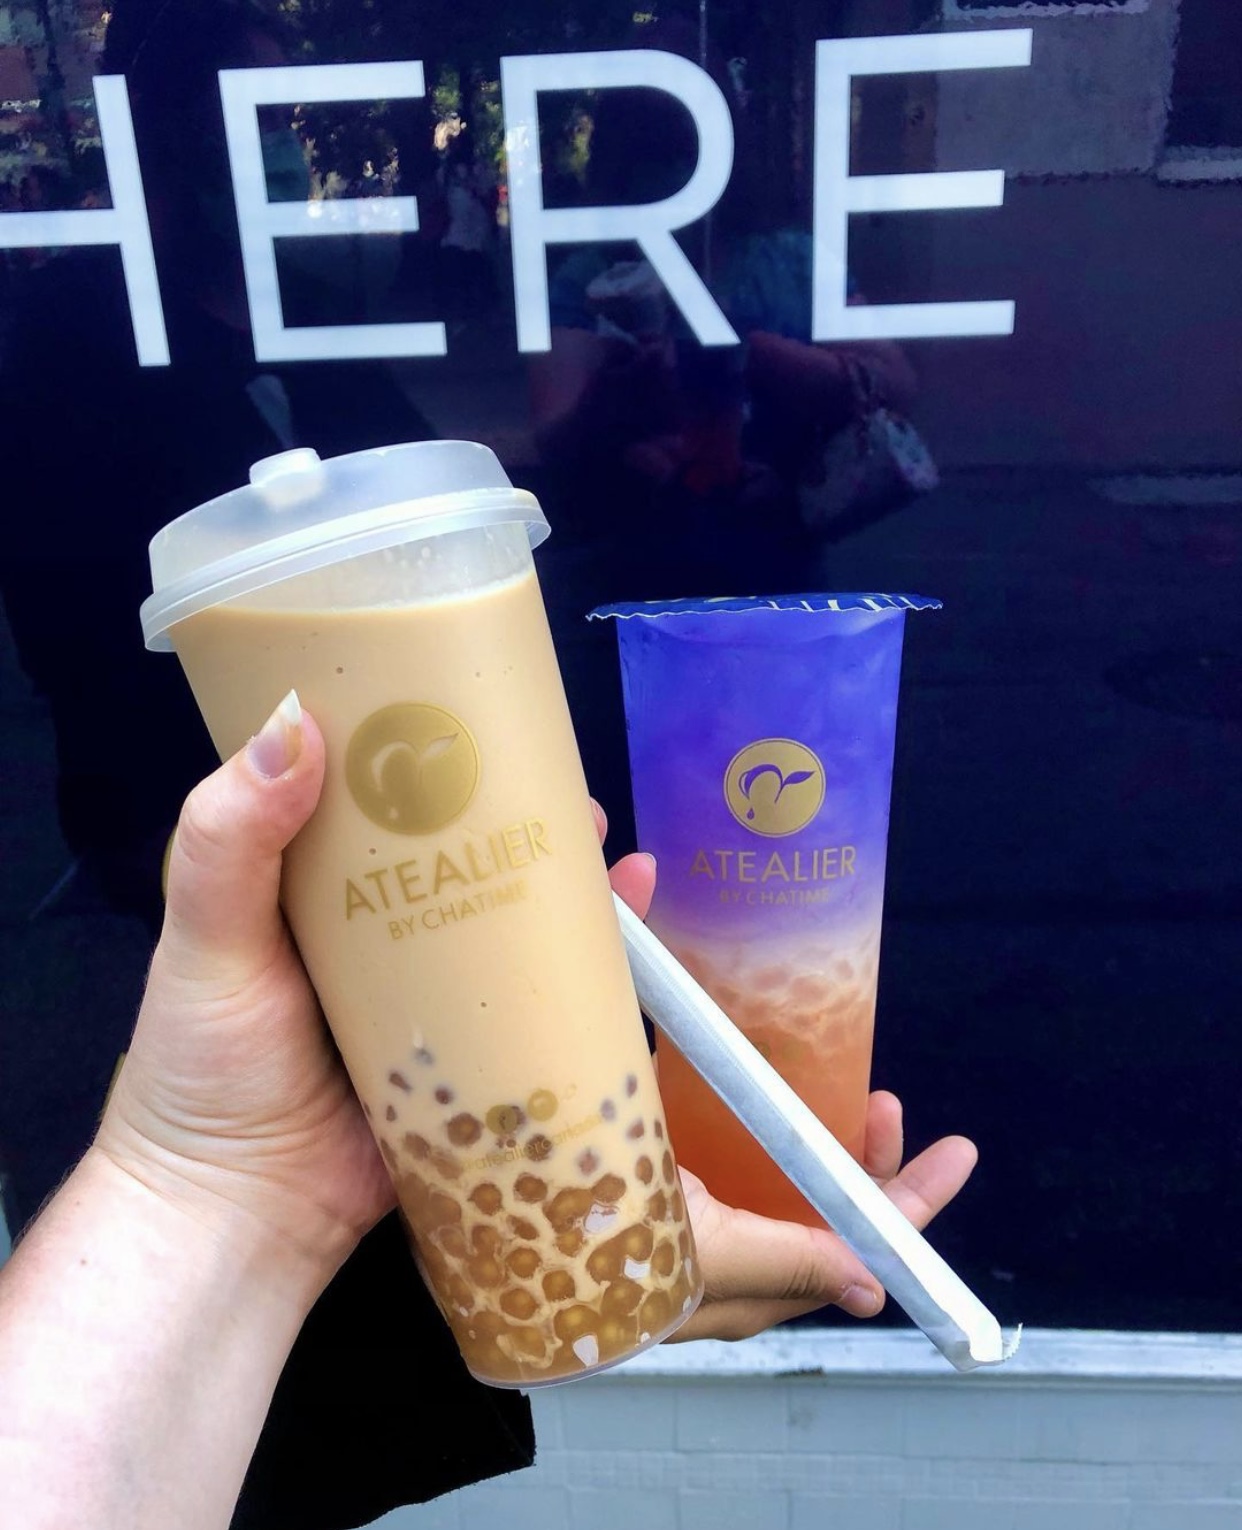 Two arms outstretched, holding large bubble tea cups: one milk tea with golden-coloured pearls and the other a shimmery purple drink with orange pearls